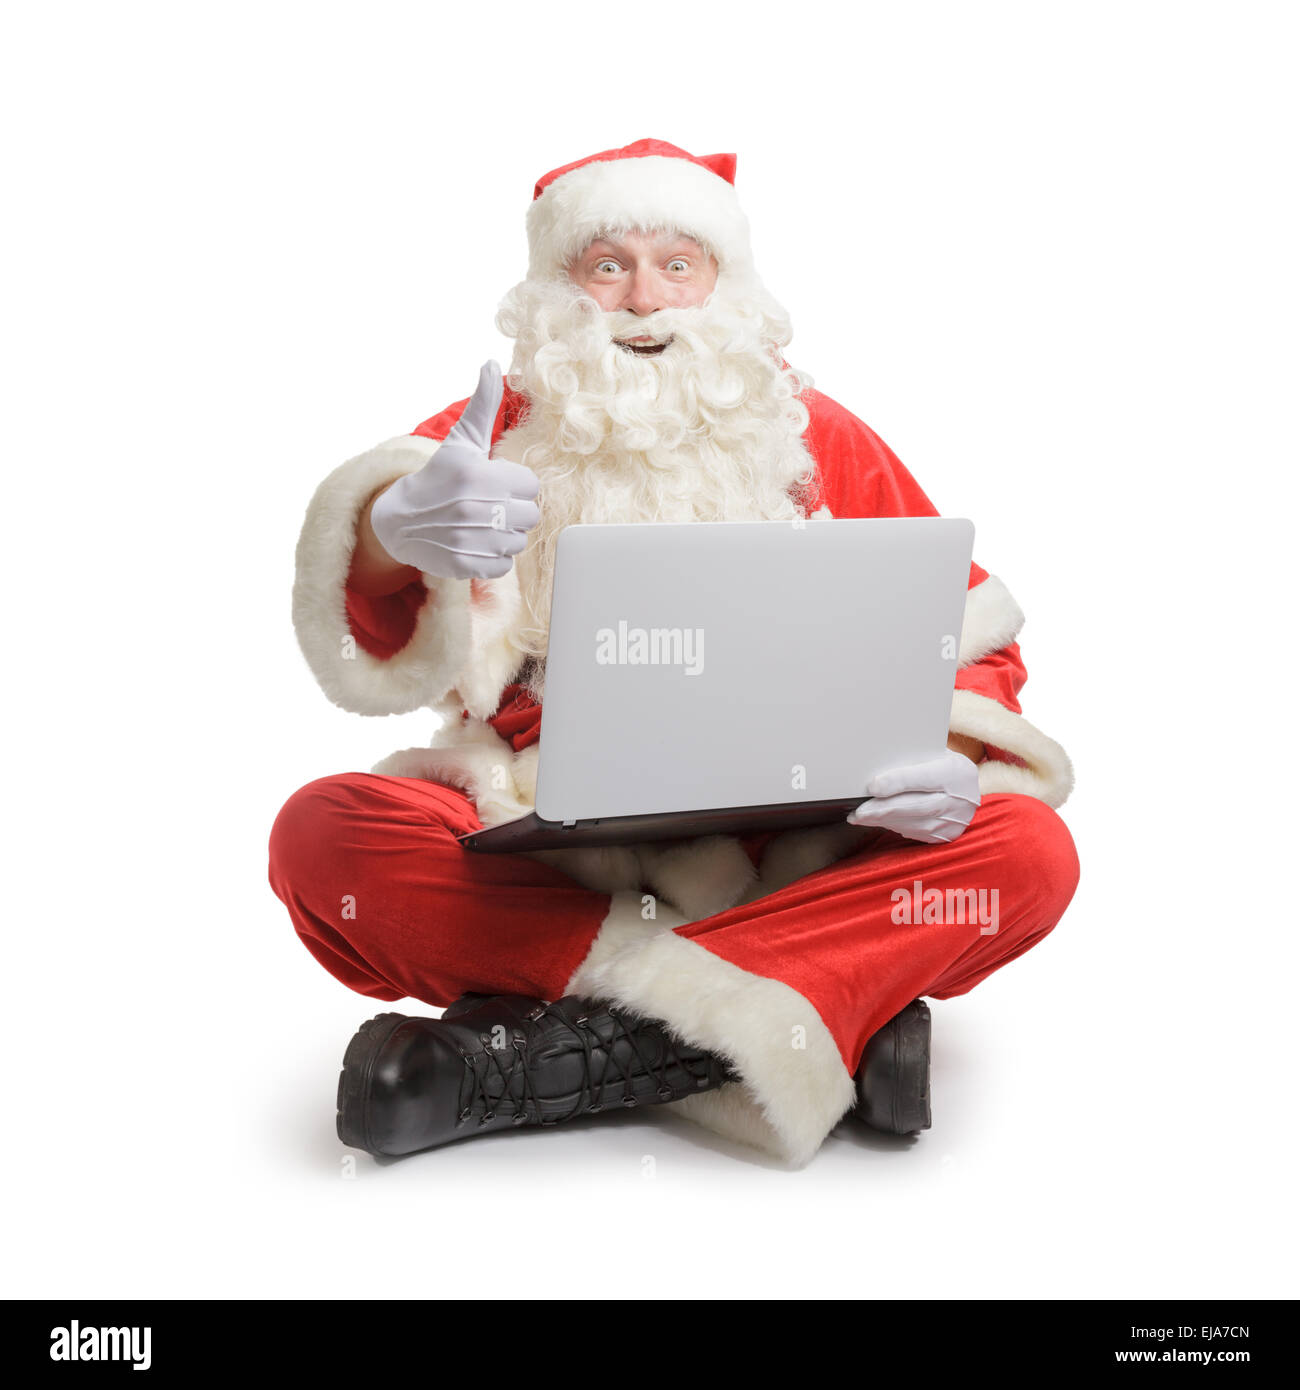 Santa searching for presents in the www Stock Photo